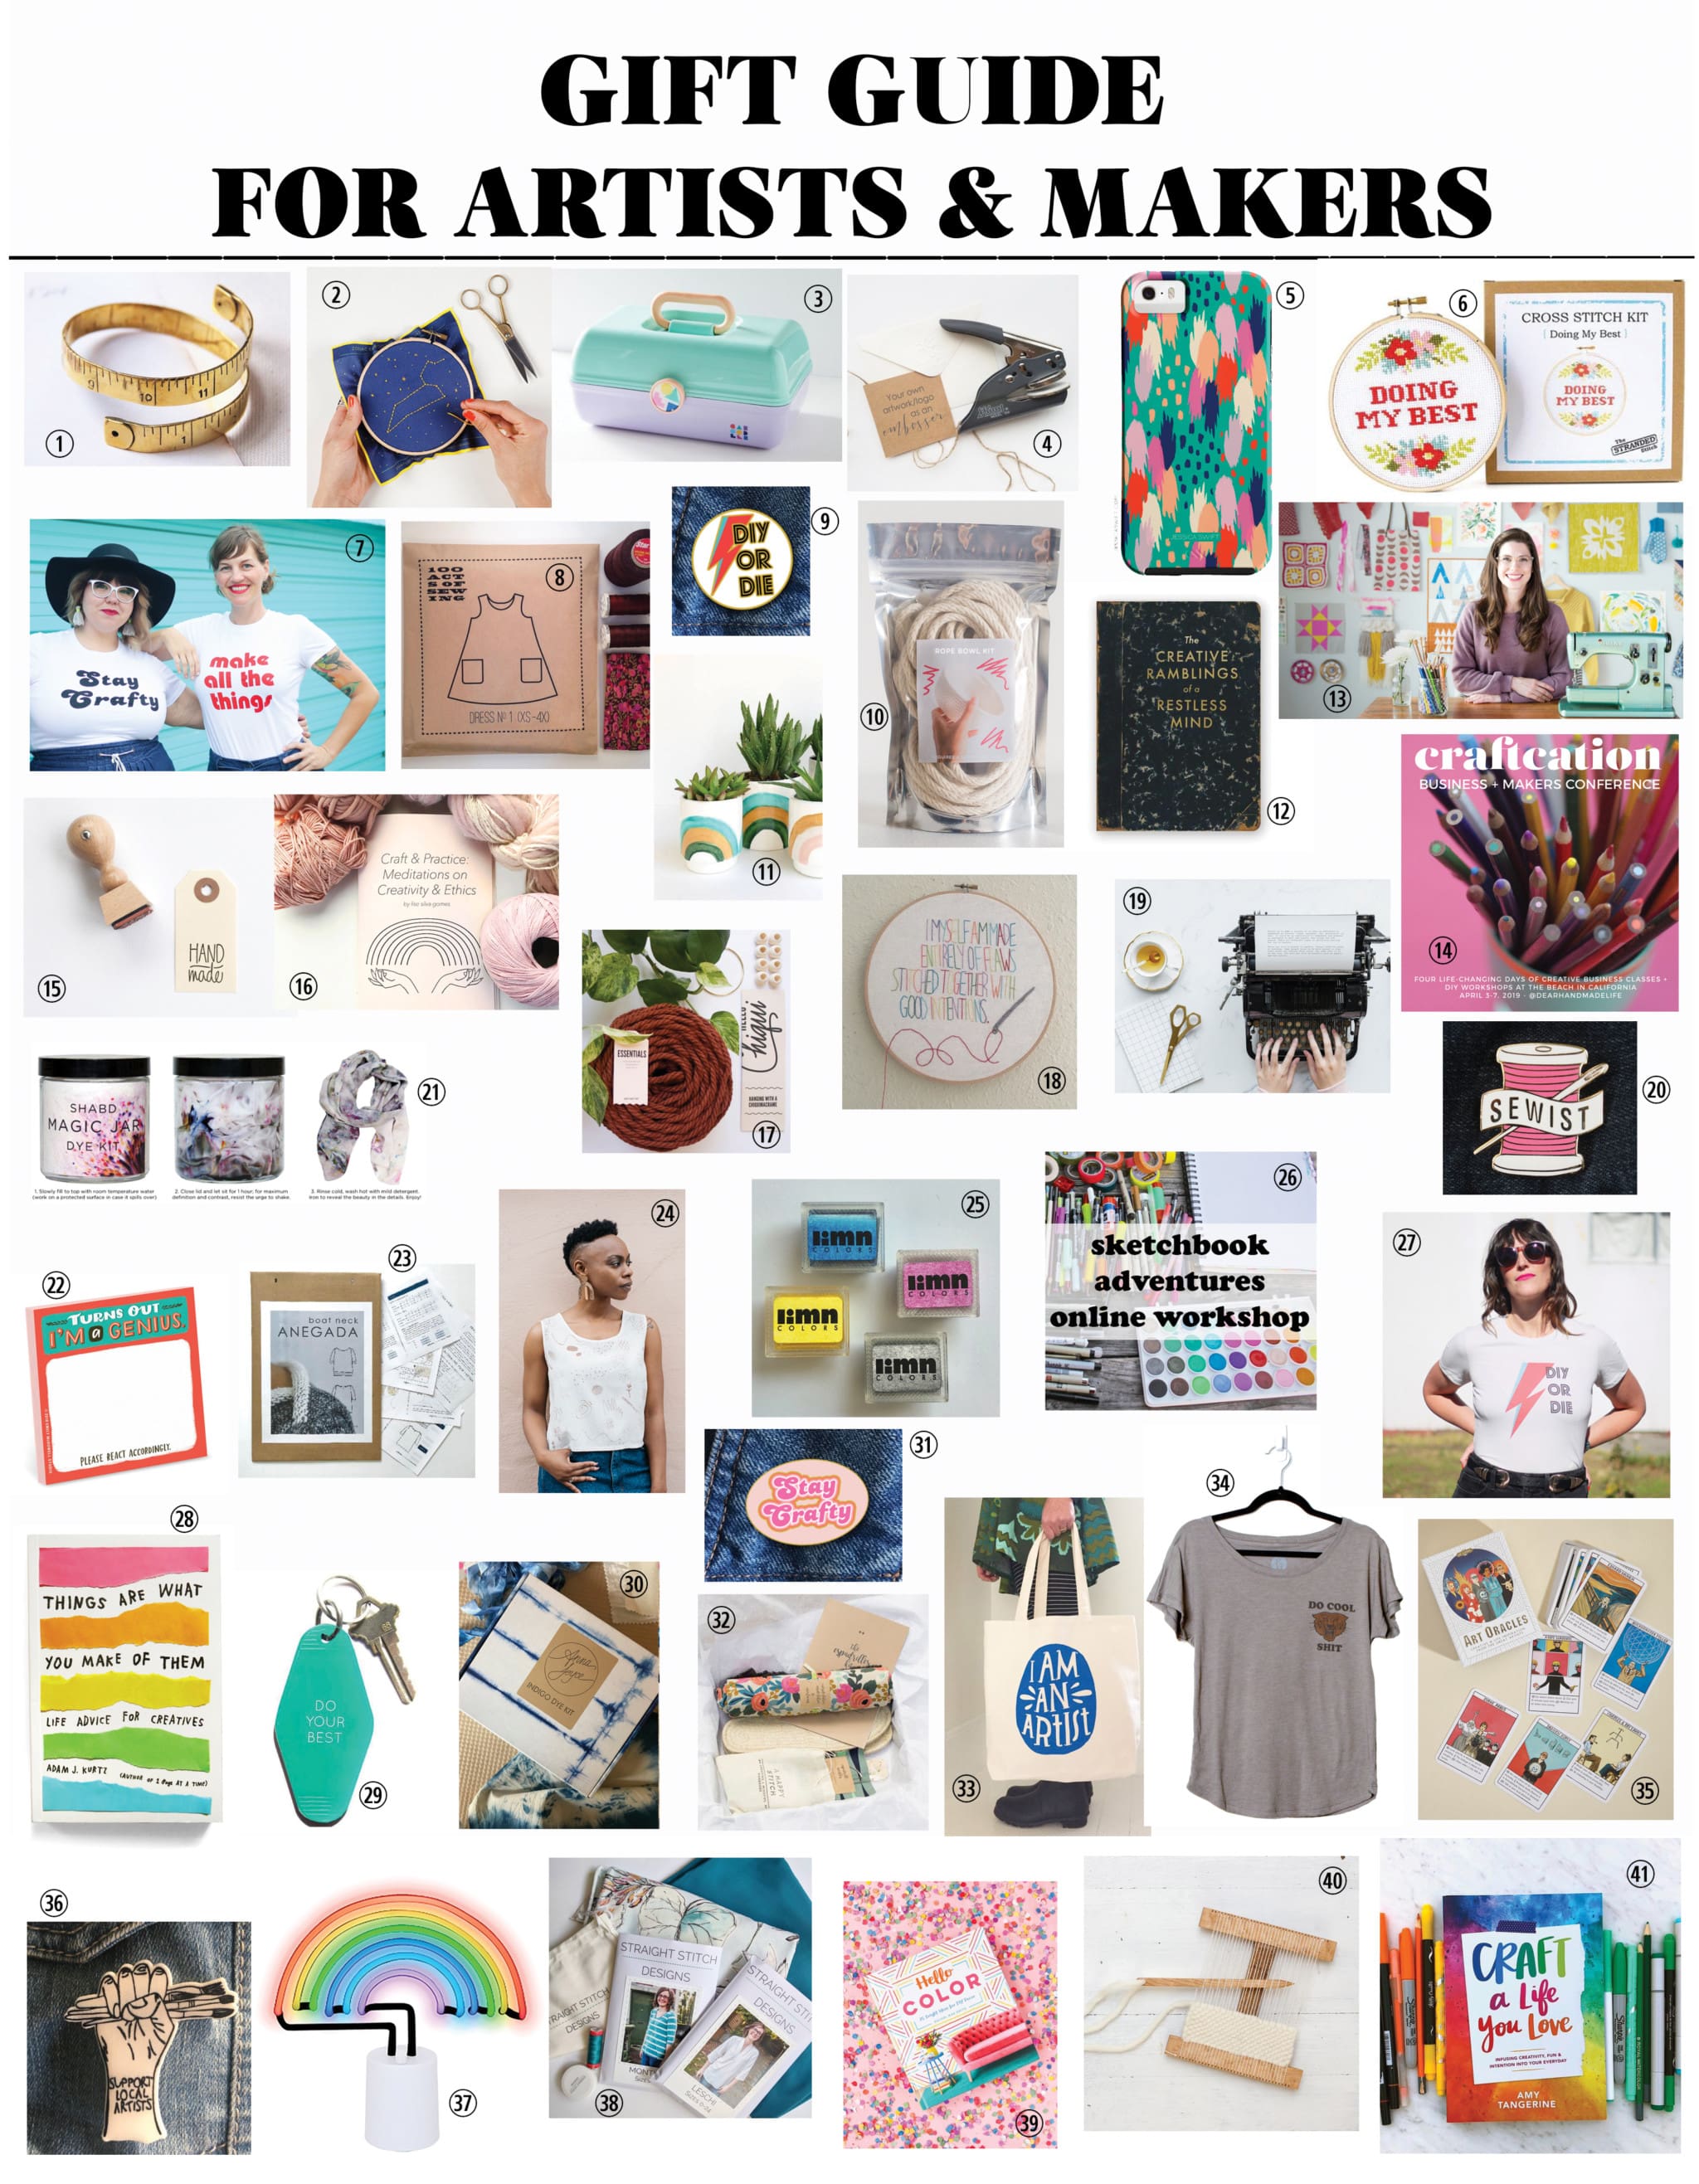 * Gift Guide for Artists Makers Creatives Crafters Diy